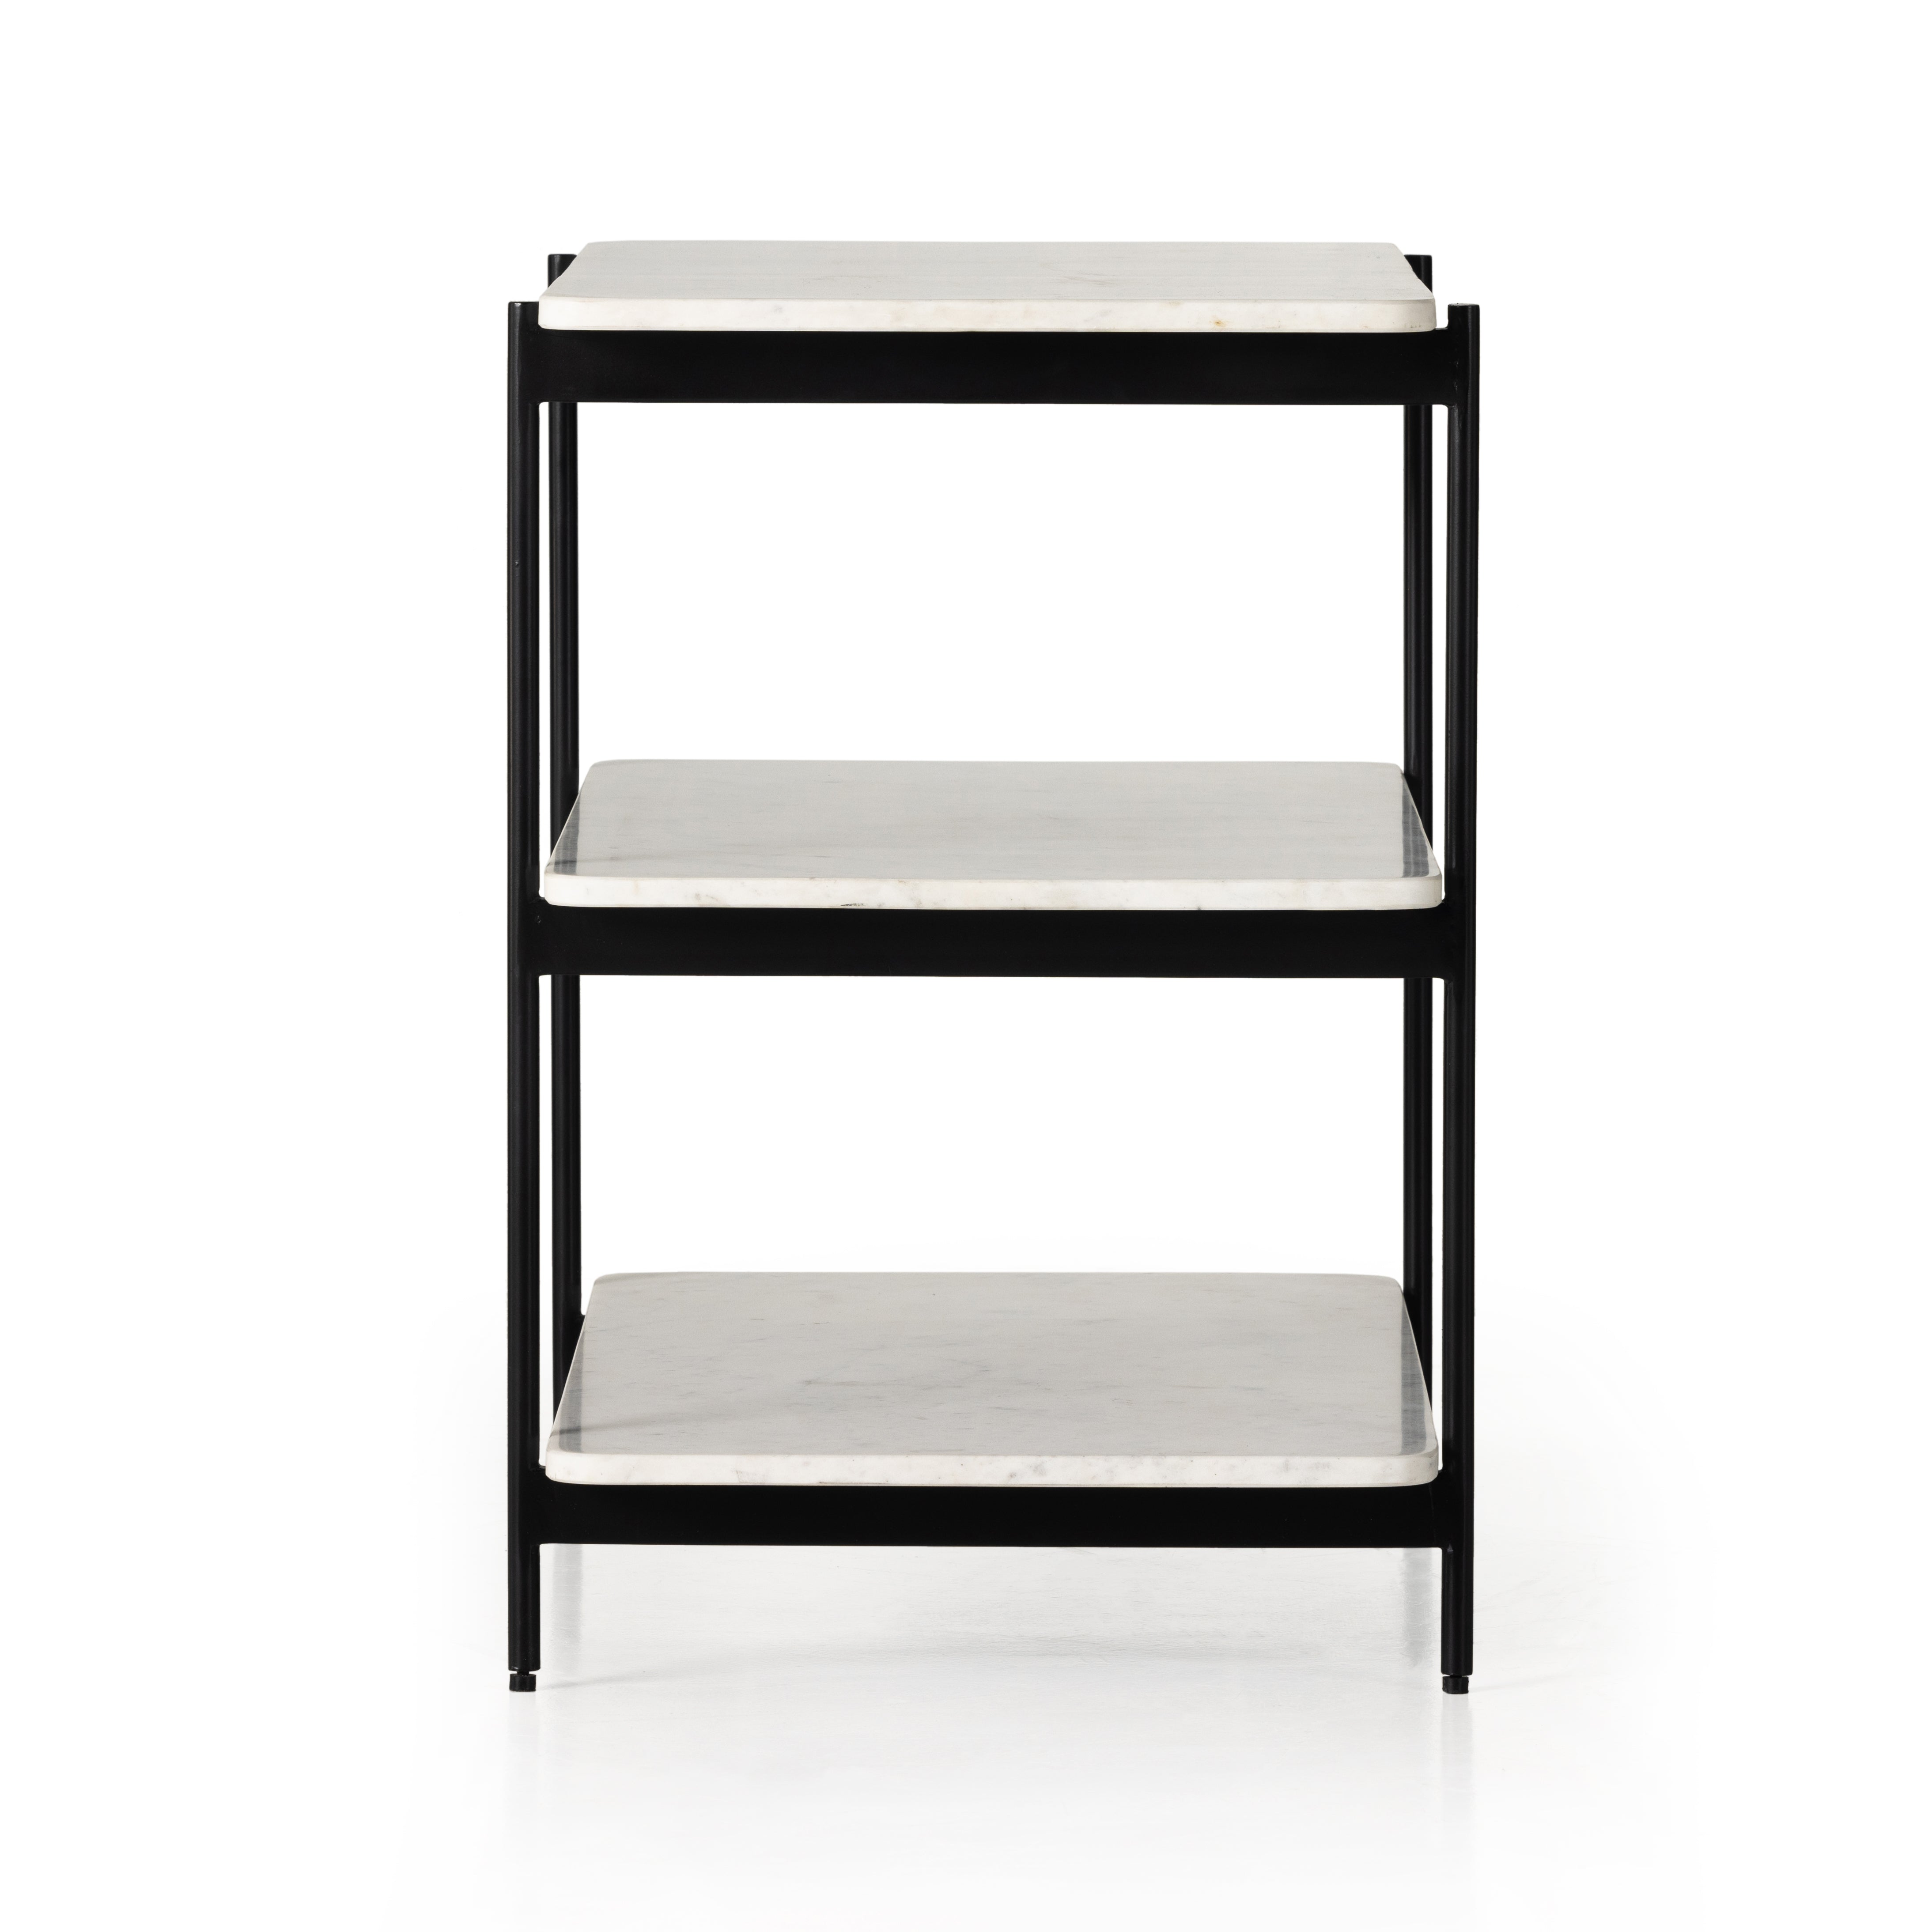 Jasper Nightstand is a black-finished iron that forms a slim, airy frame for open shelving of polished white marble. Amethyst Home provides interior design services, furniture, rugs, and lighting in the Portland metro area. 